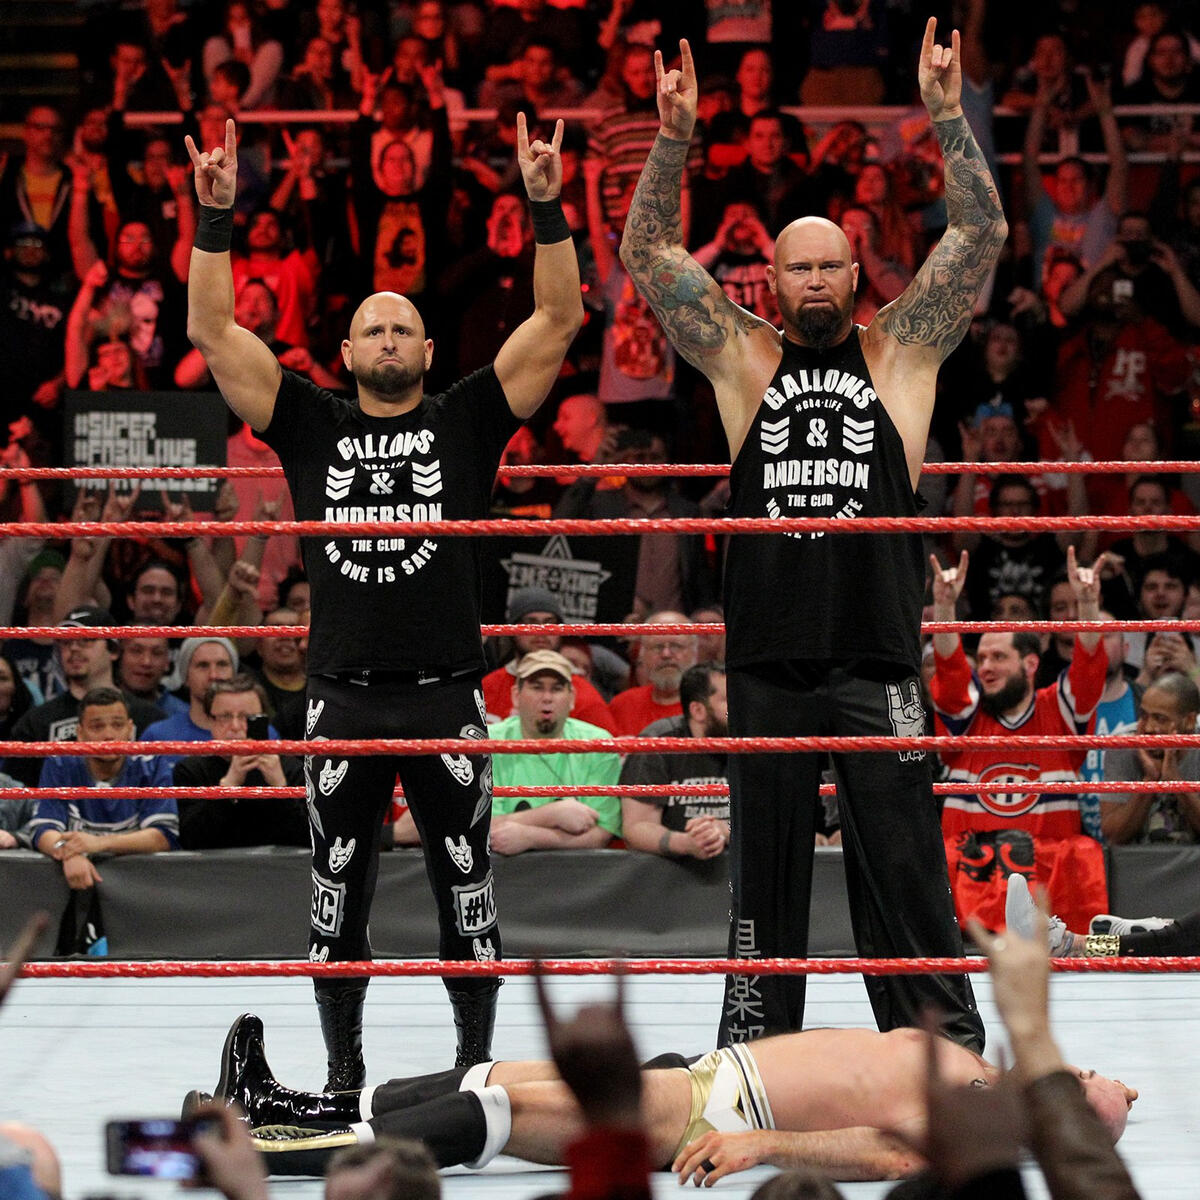 Anderson & Gallows stand tall after their sneak attack, but Raw General Manager Mick Foley would inform the duo that they will be defending the Raw Tag Team Championships in a Triple Threat Match at WrestleMania.